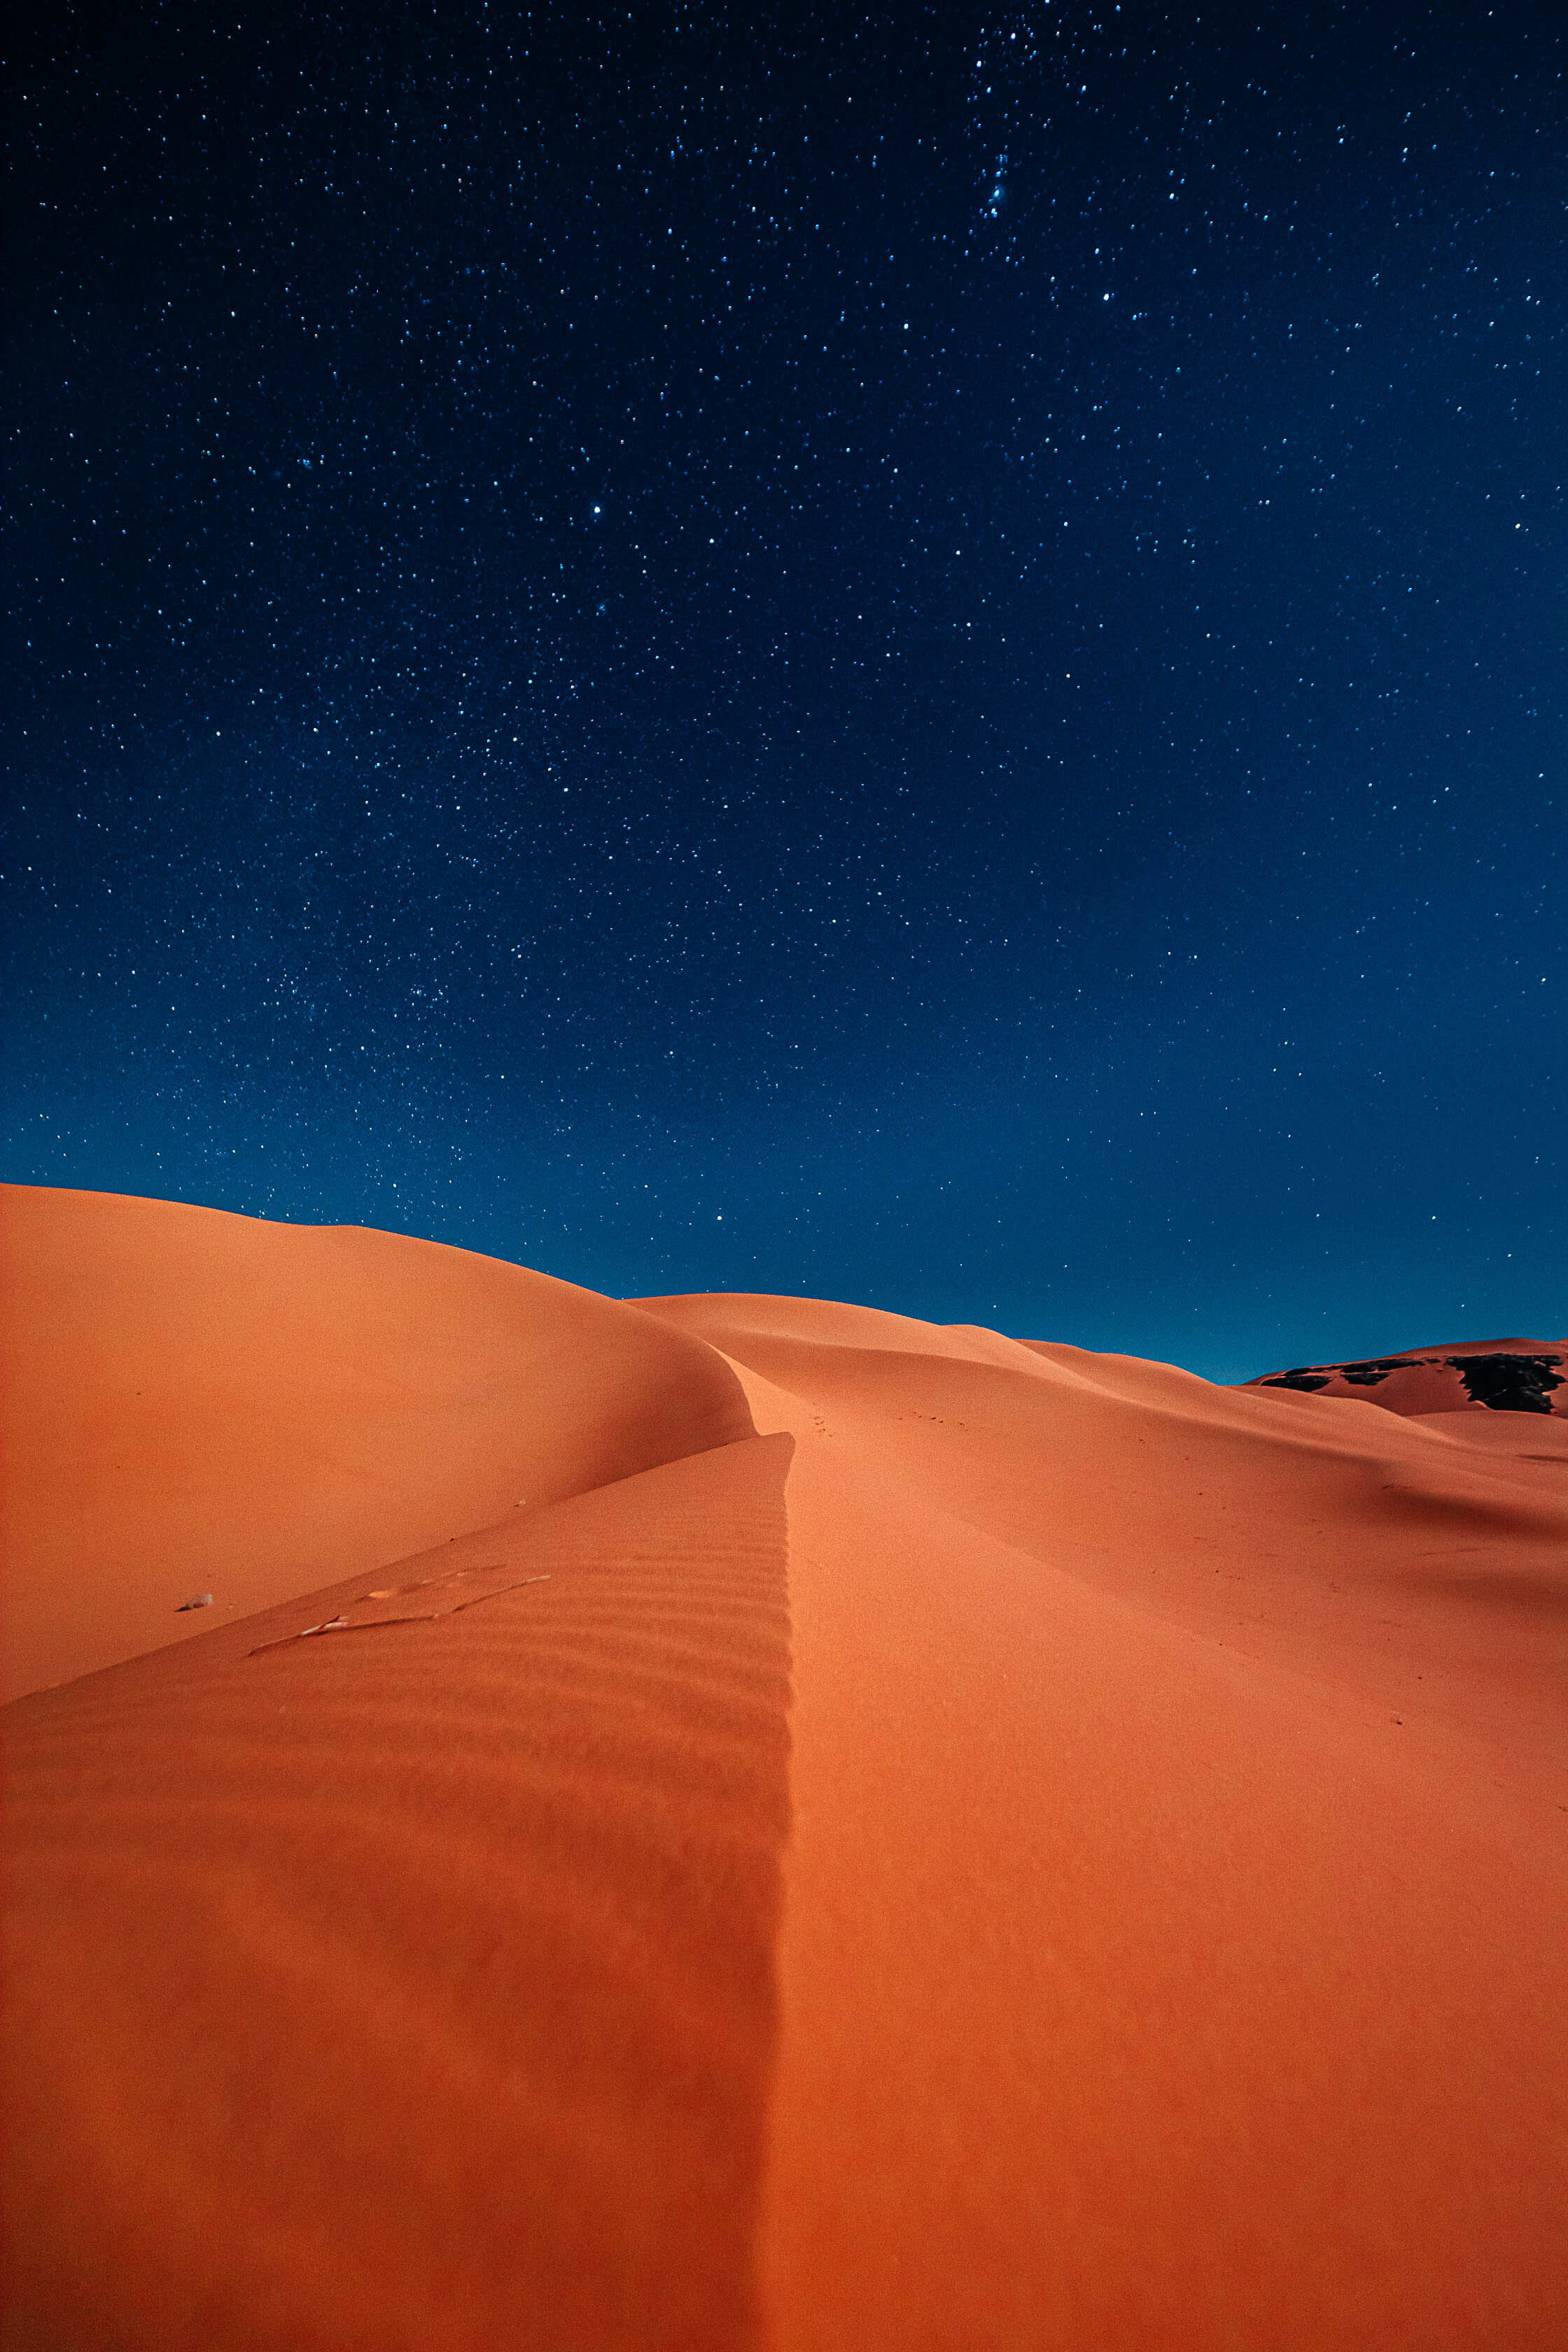 endless stars against a dark blue sky over the reddish looking sands of the Sahara